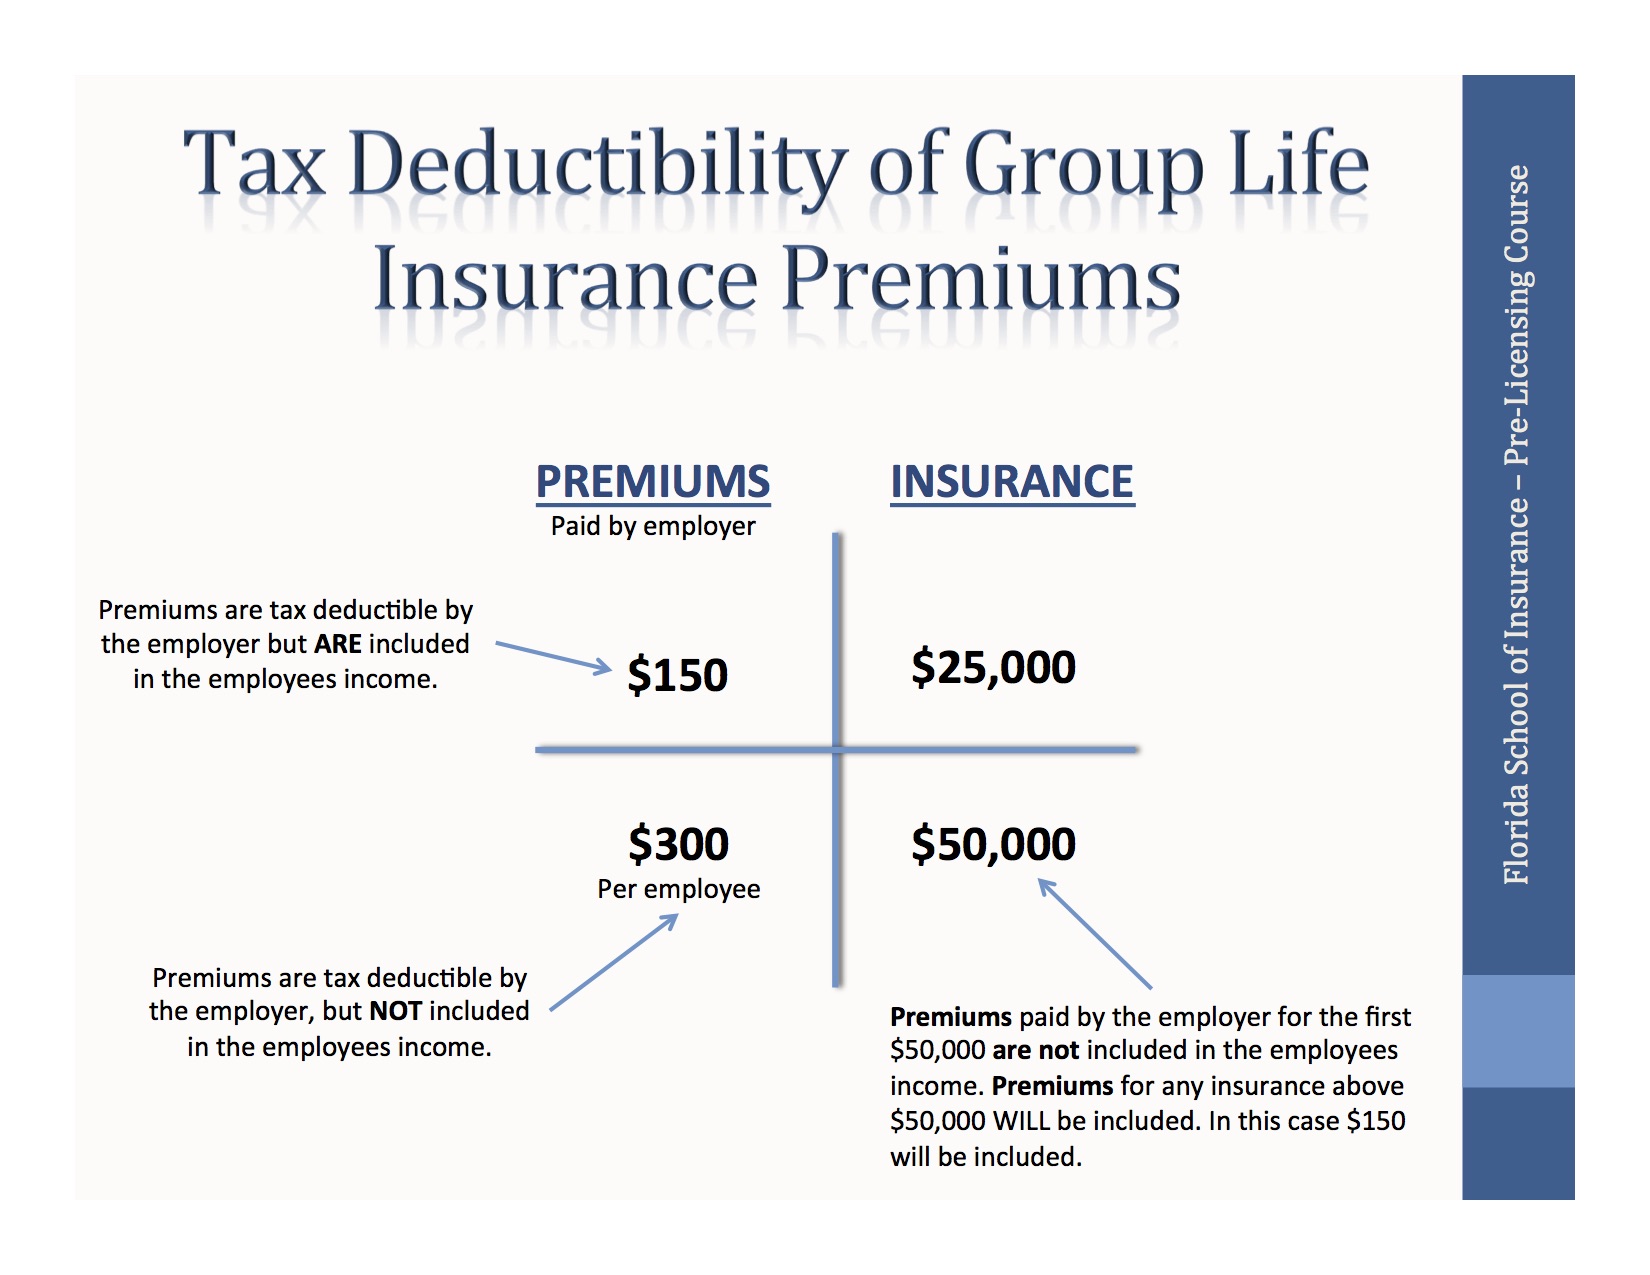 Tax Relief For Life Insurance Premiums